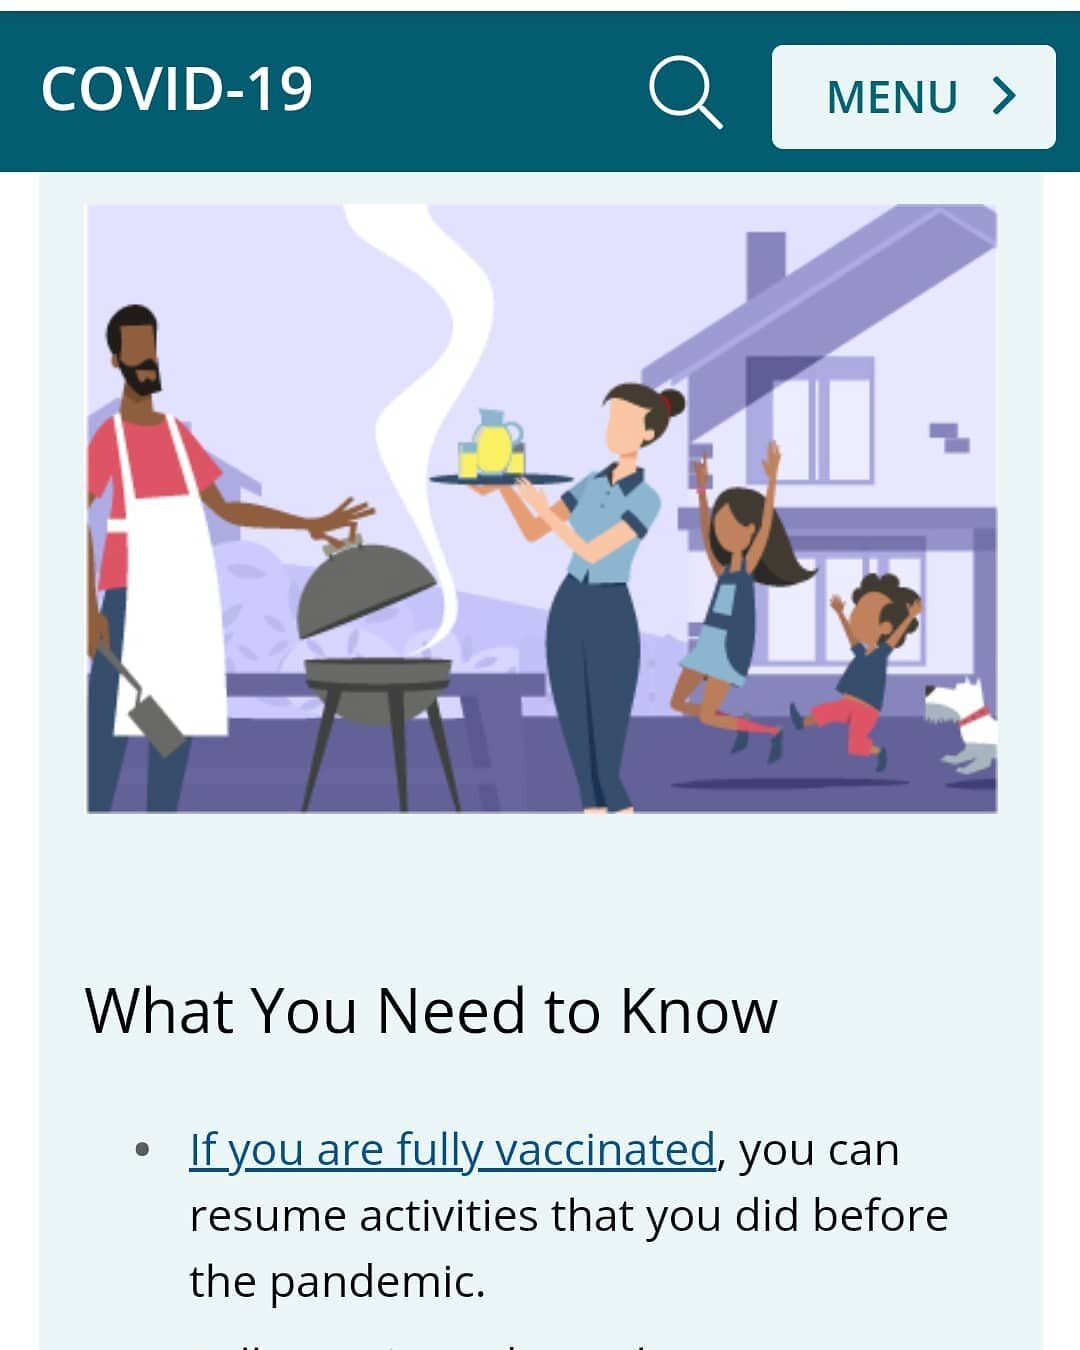 As many of you probably are aware the CDC offered new guidance last week in light of new data indicating the effectiveness&nbsp;of the vaccine in fighting COVID-19.&nbsp; The vaccines have proven to not only help individuals not get sick, BUT also ha